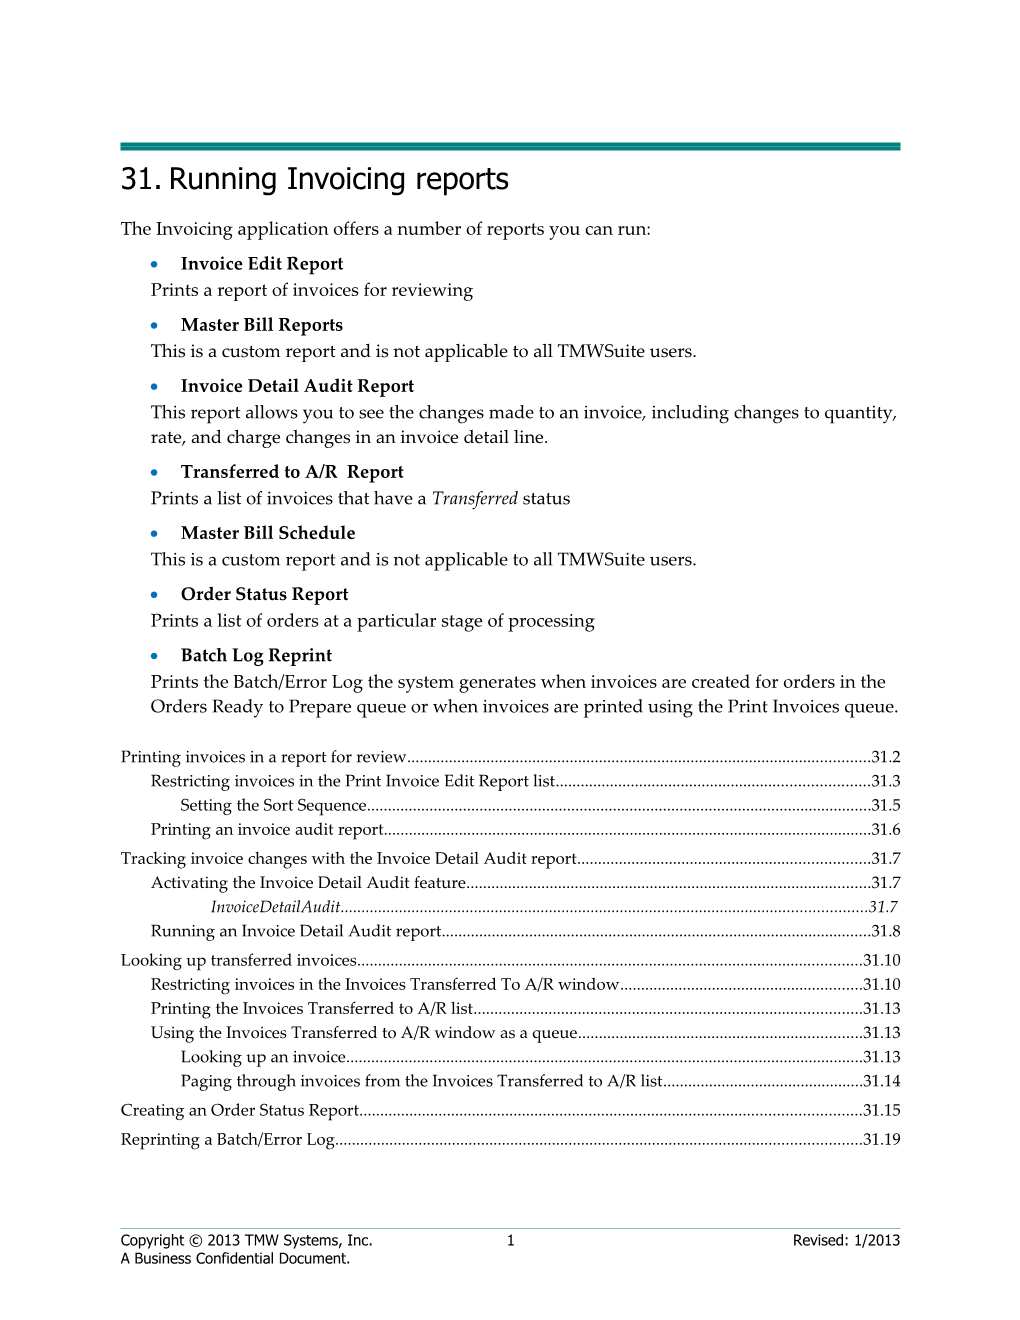 Running Invoicing Reports